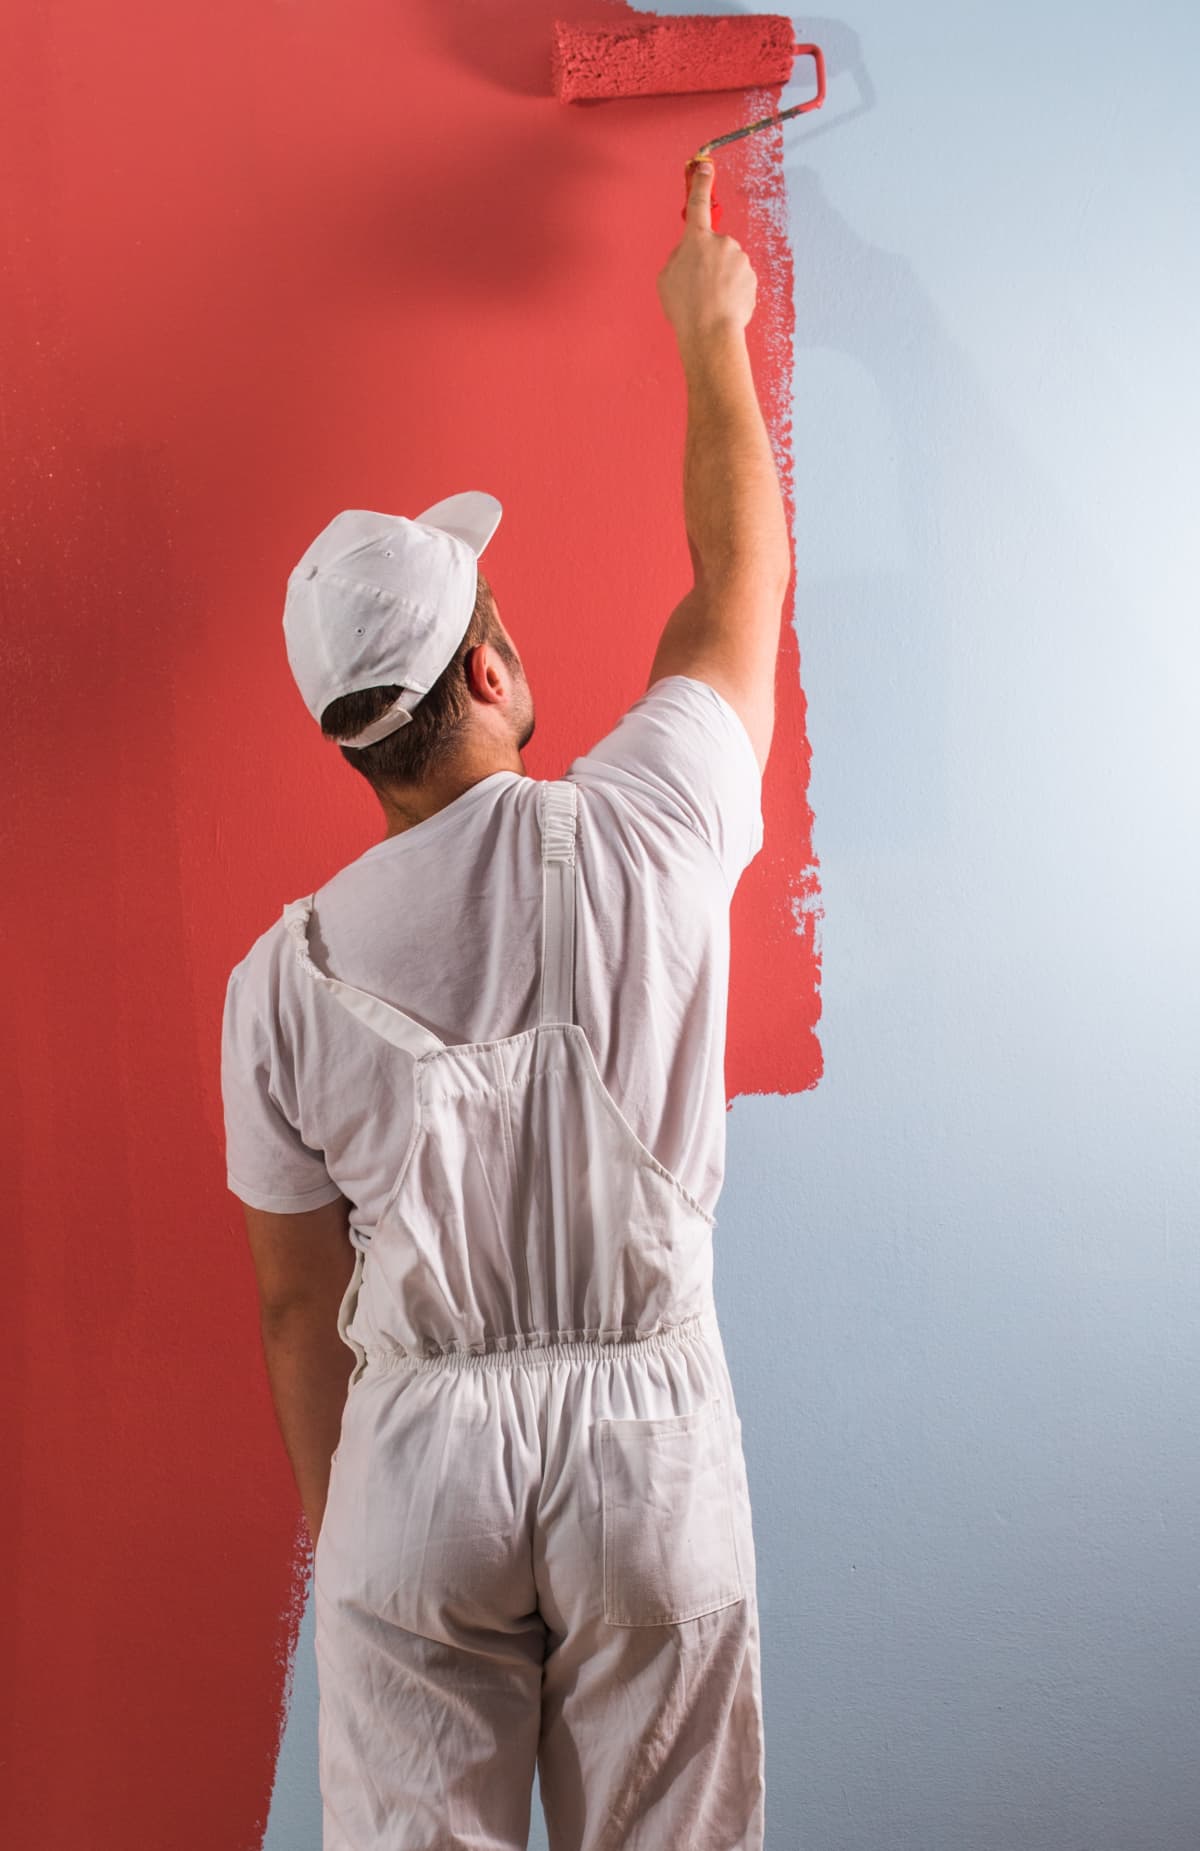 Man painting wall red with roller